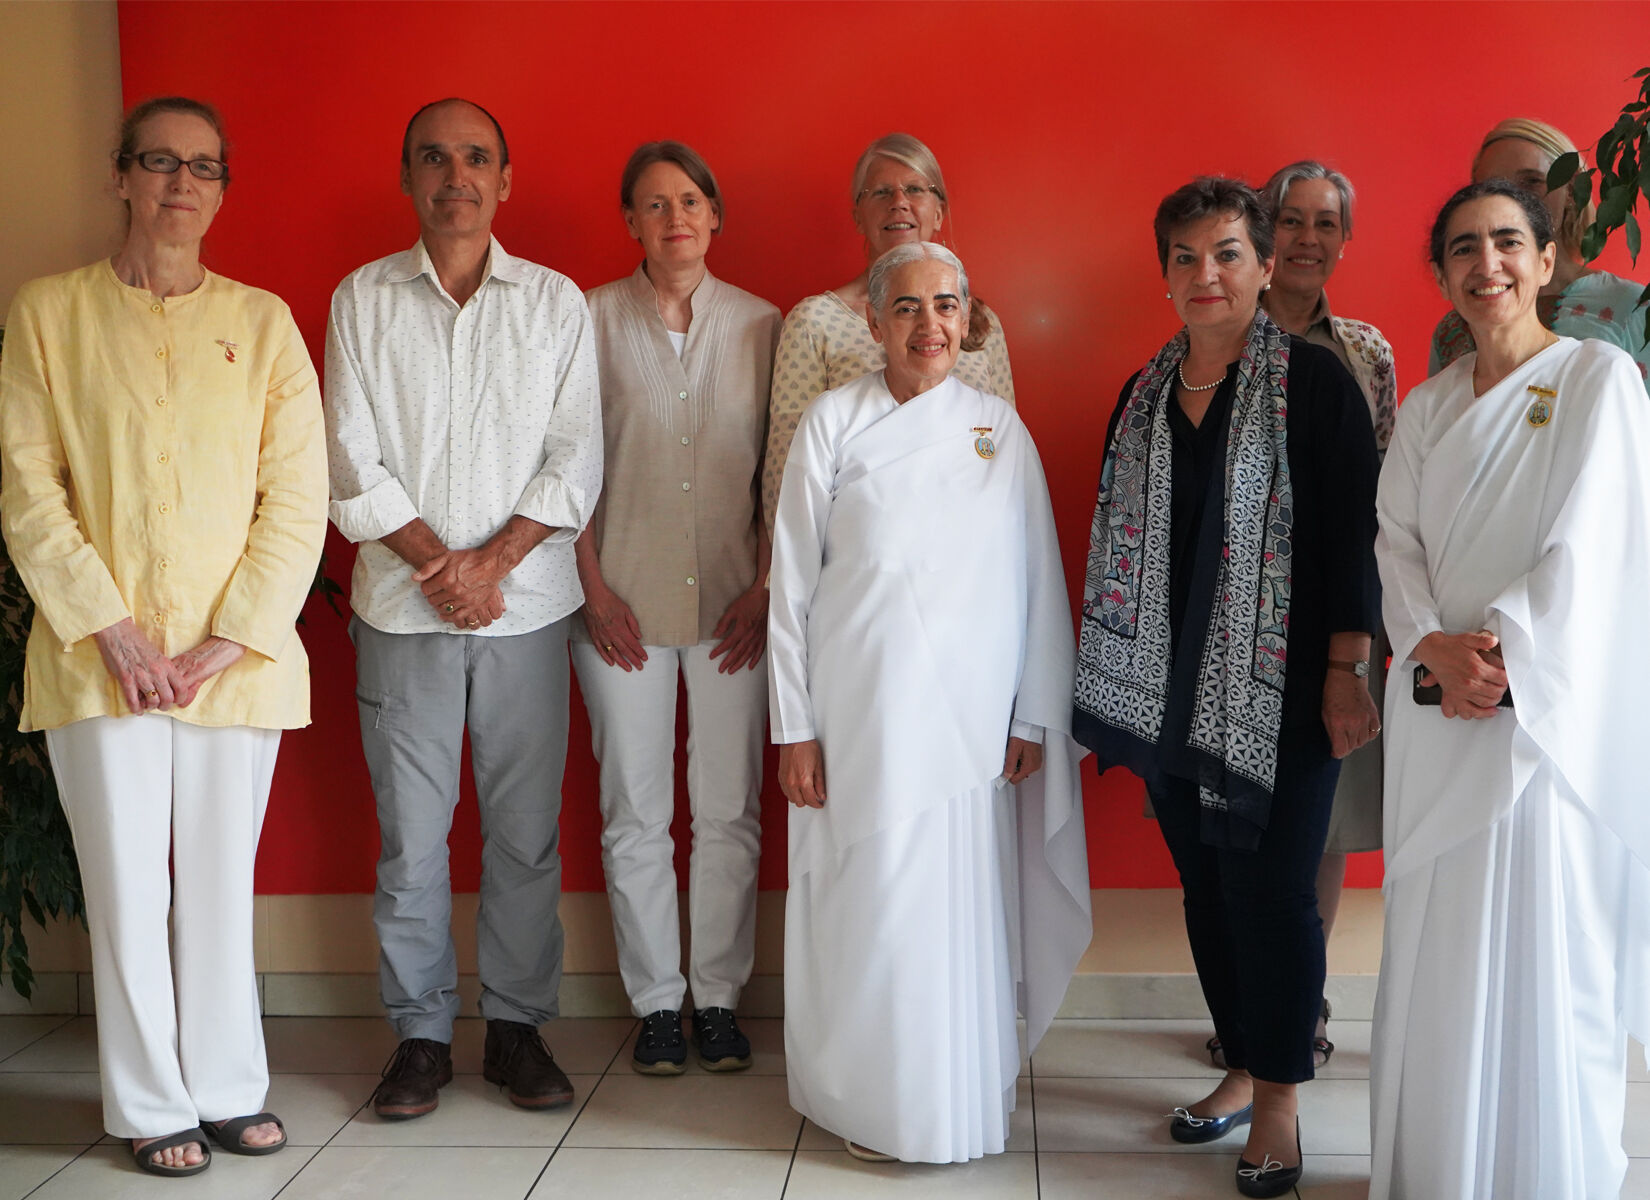 With Christiana Figueres, former UNFCCC, and The Brahma Kumaris Environment Initiative team, London 2019